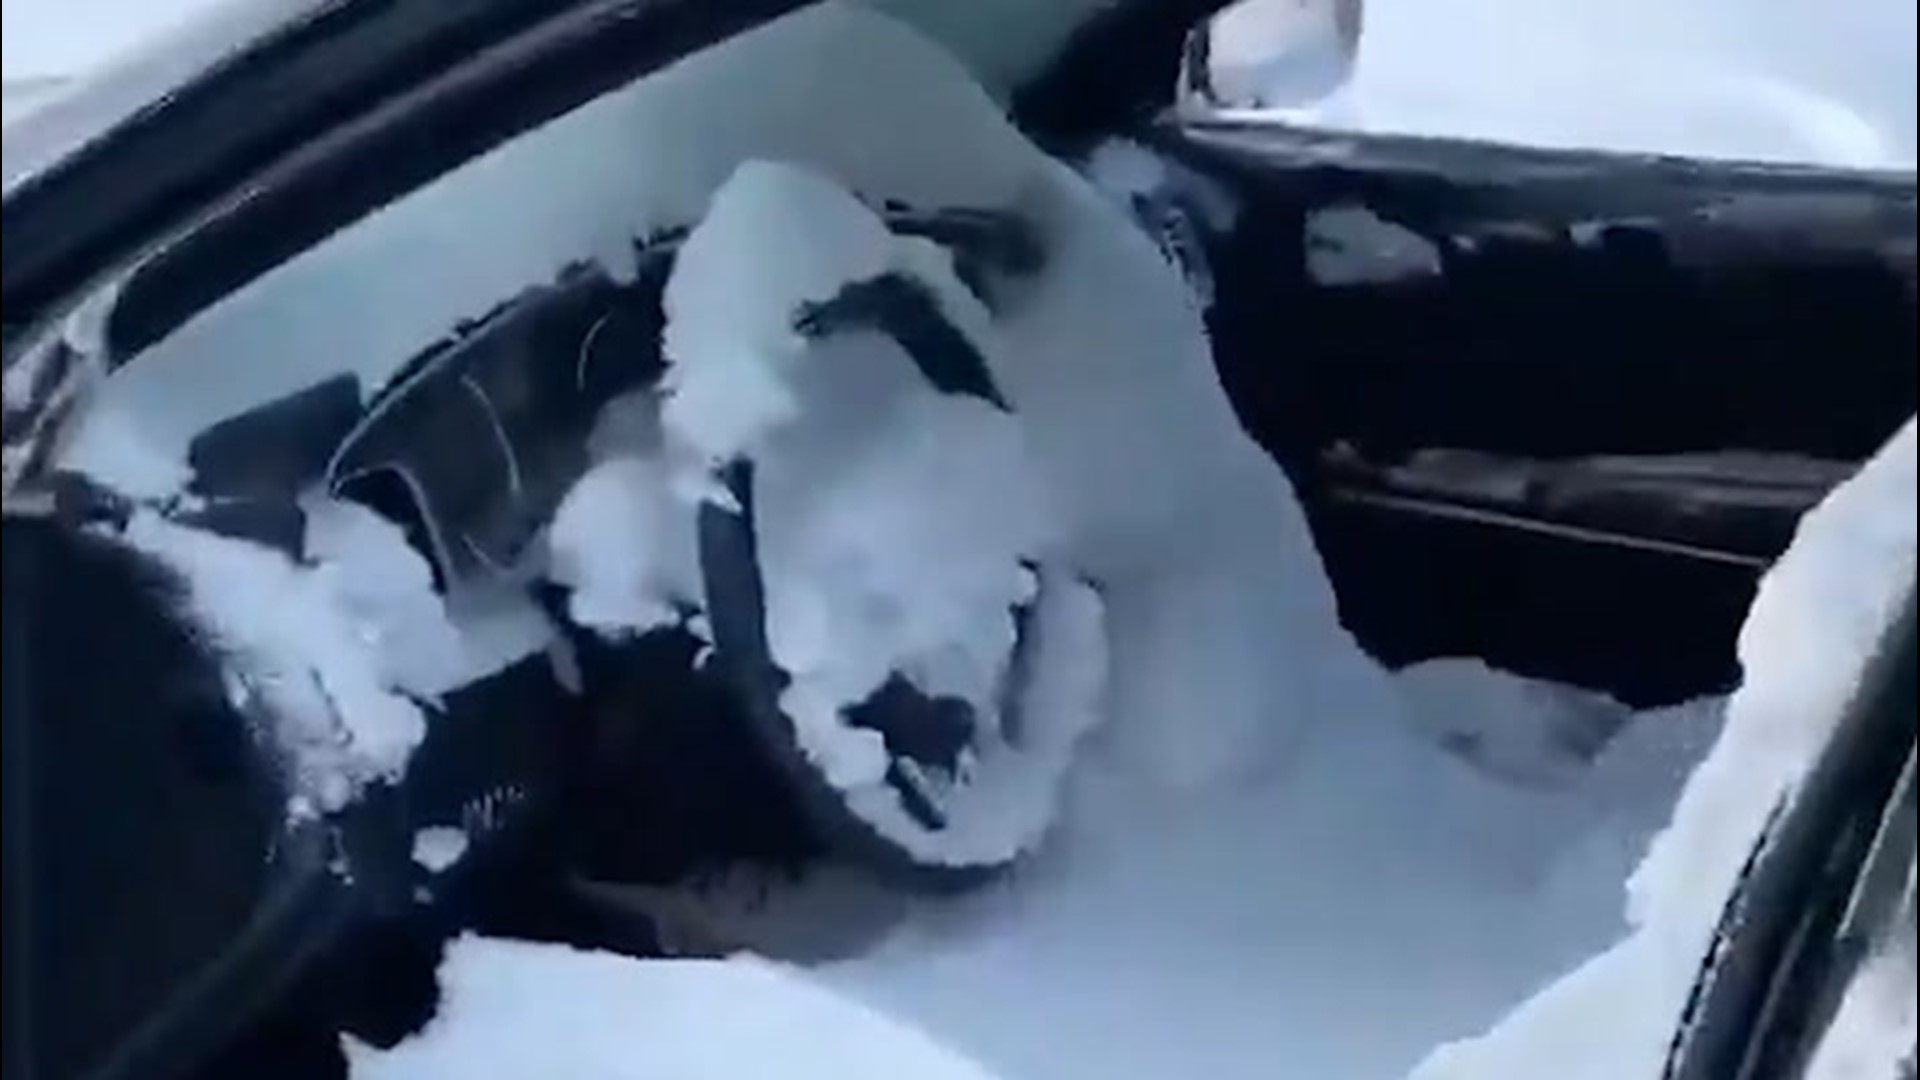 A Newfoundland woman was surprised when she looked out after a record-breaking snowstorm and saw no snow on her car. Her questions were answered when she noticed the windows were down.